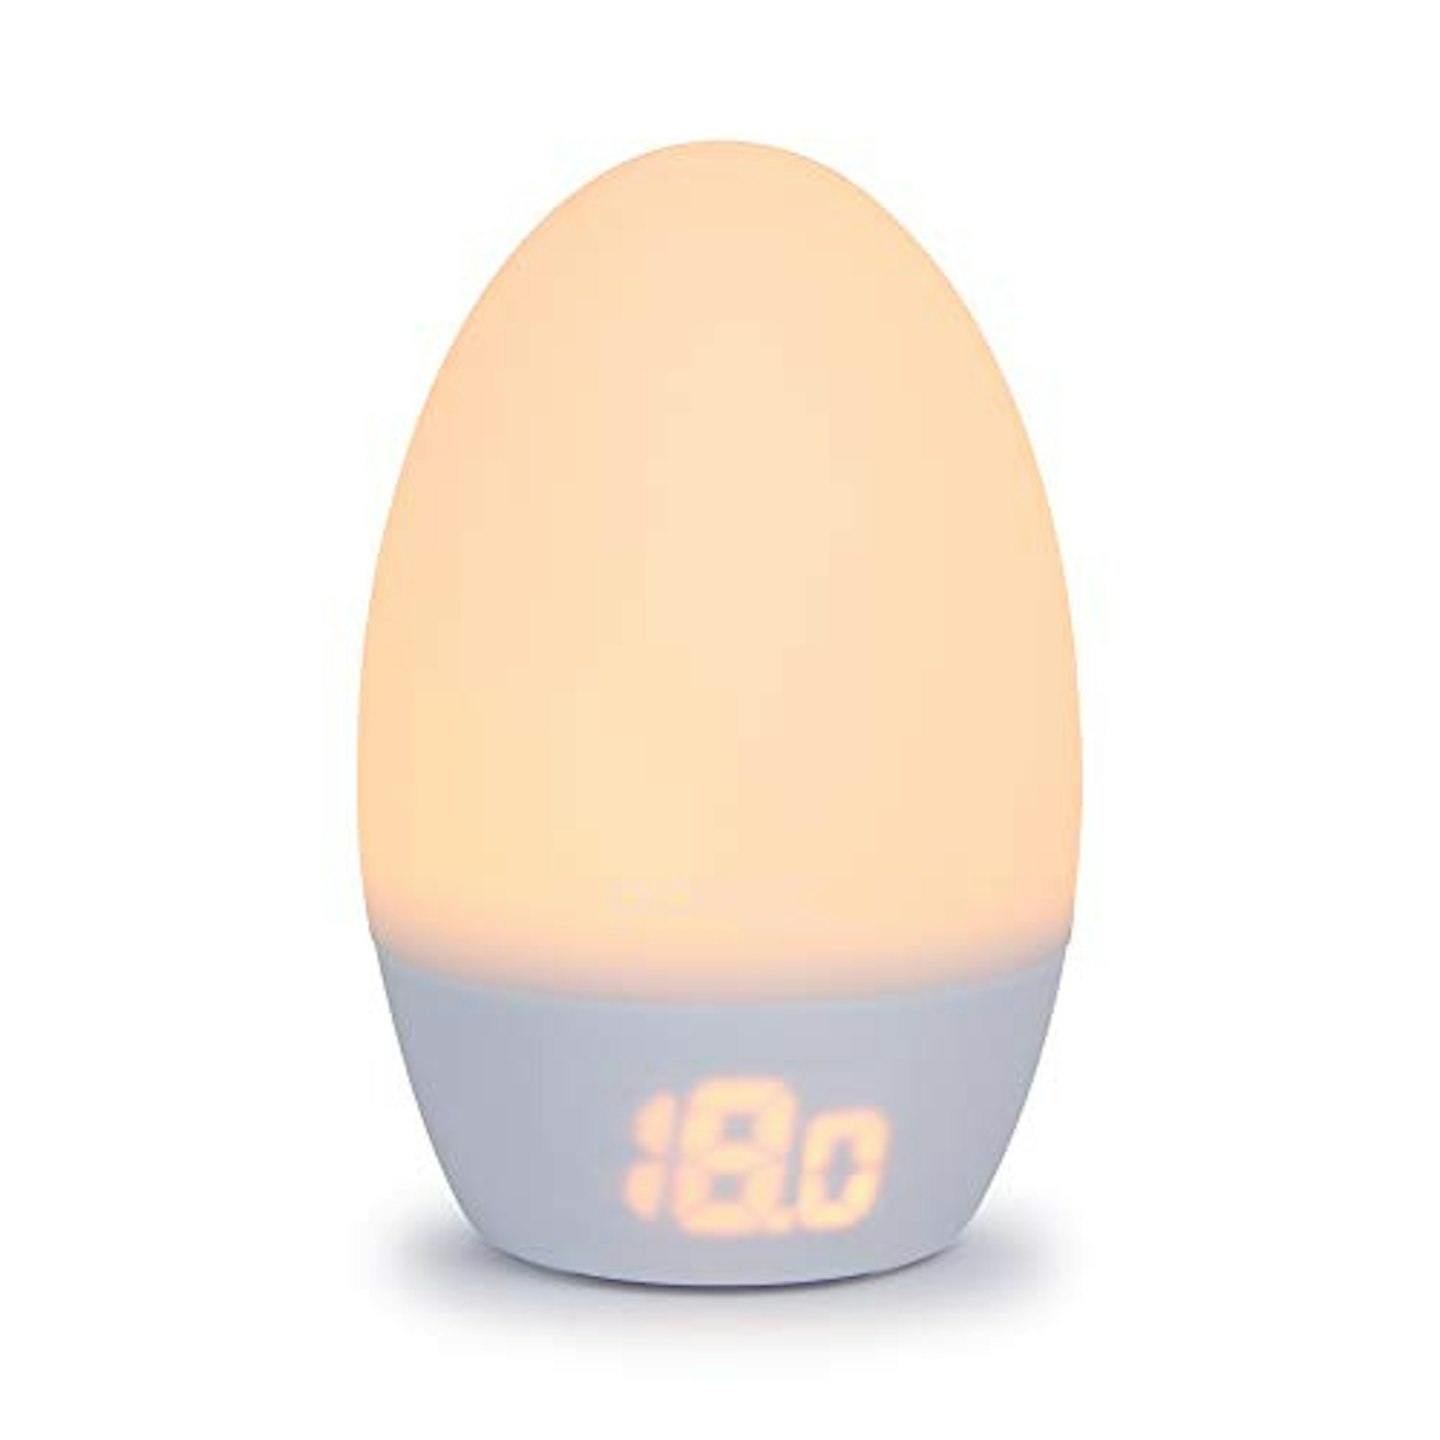 The Gro Company Groegg2 Colour Changing Room Thermometer